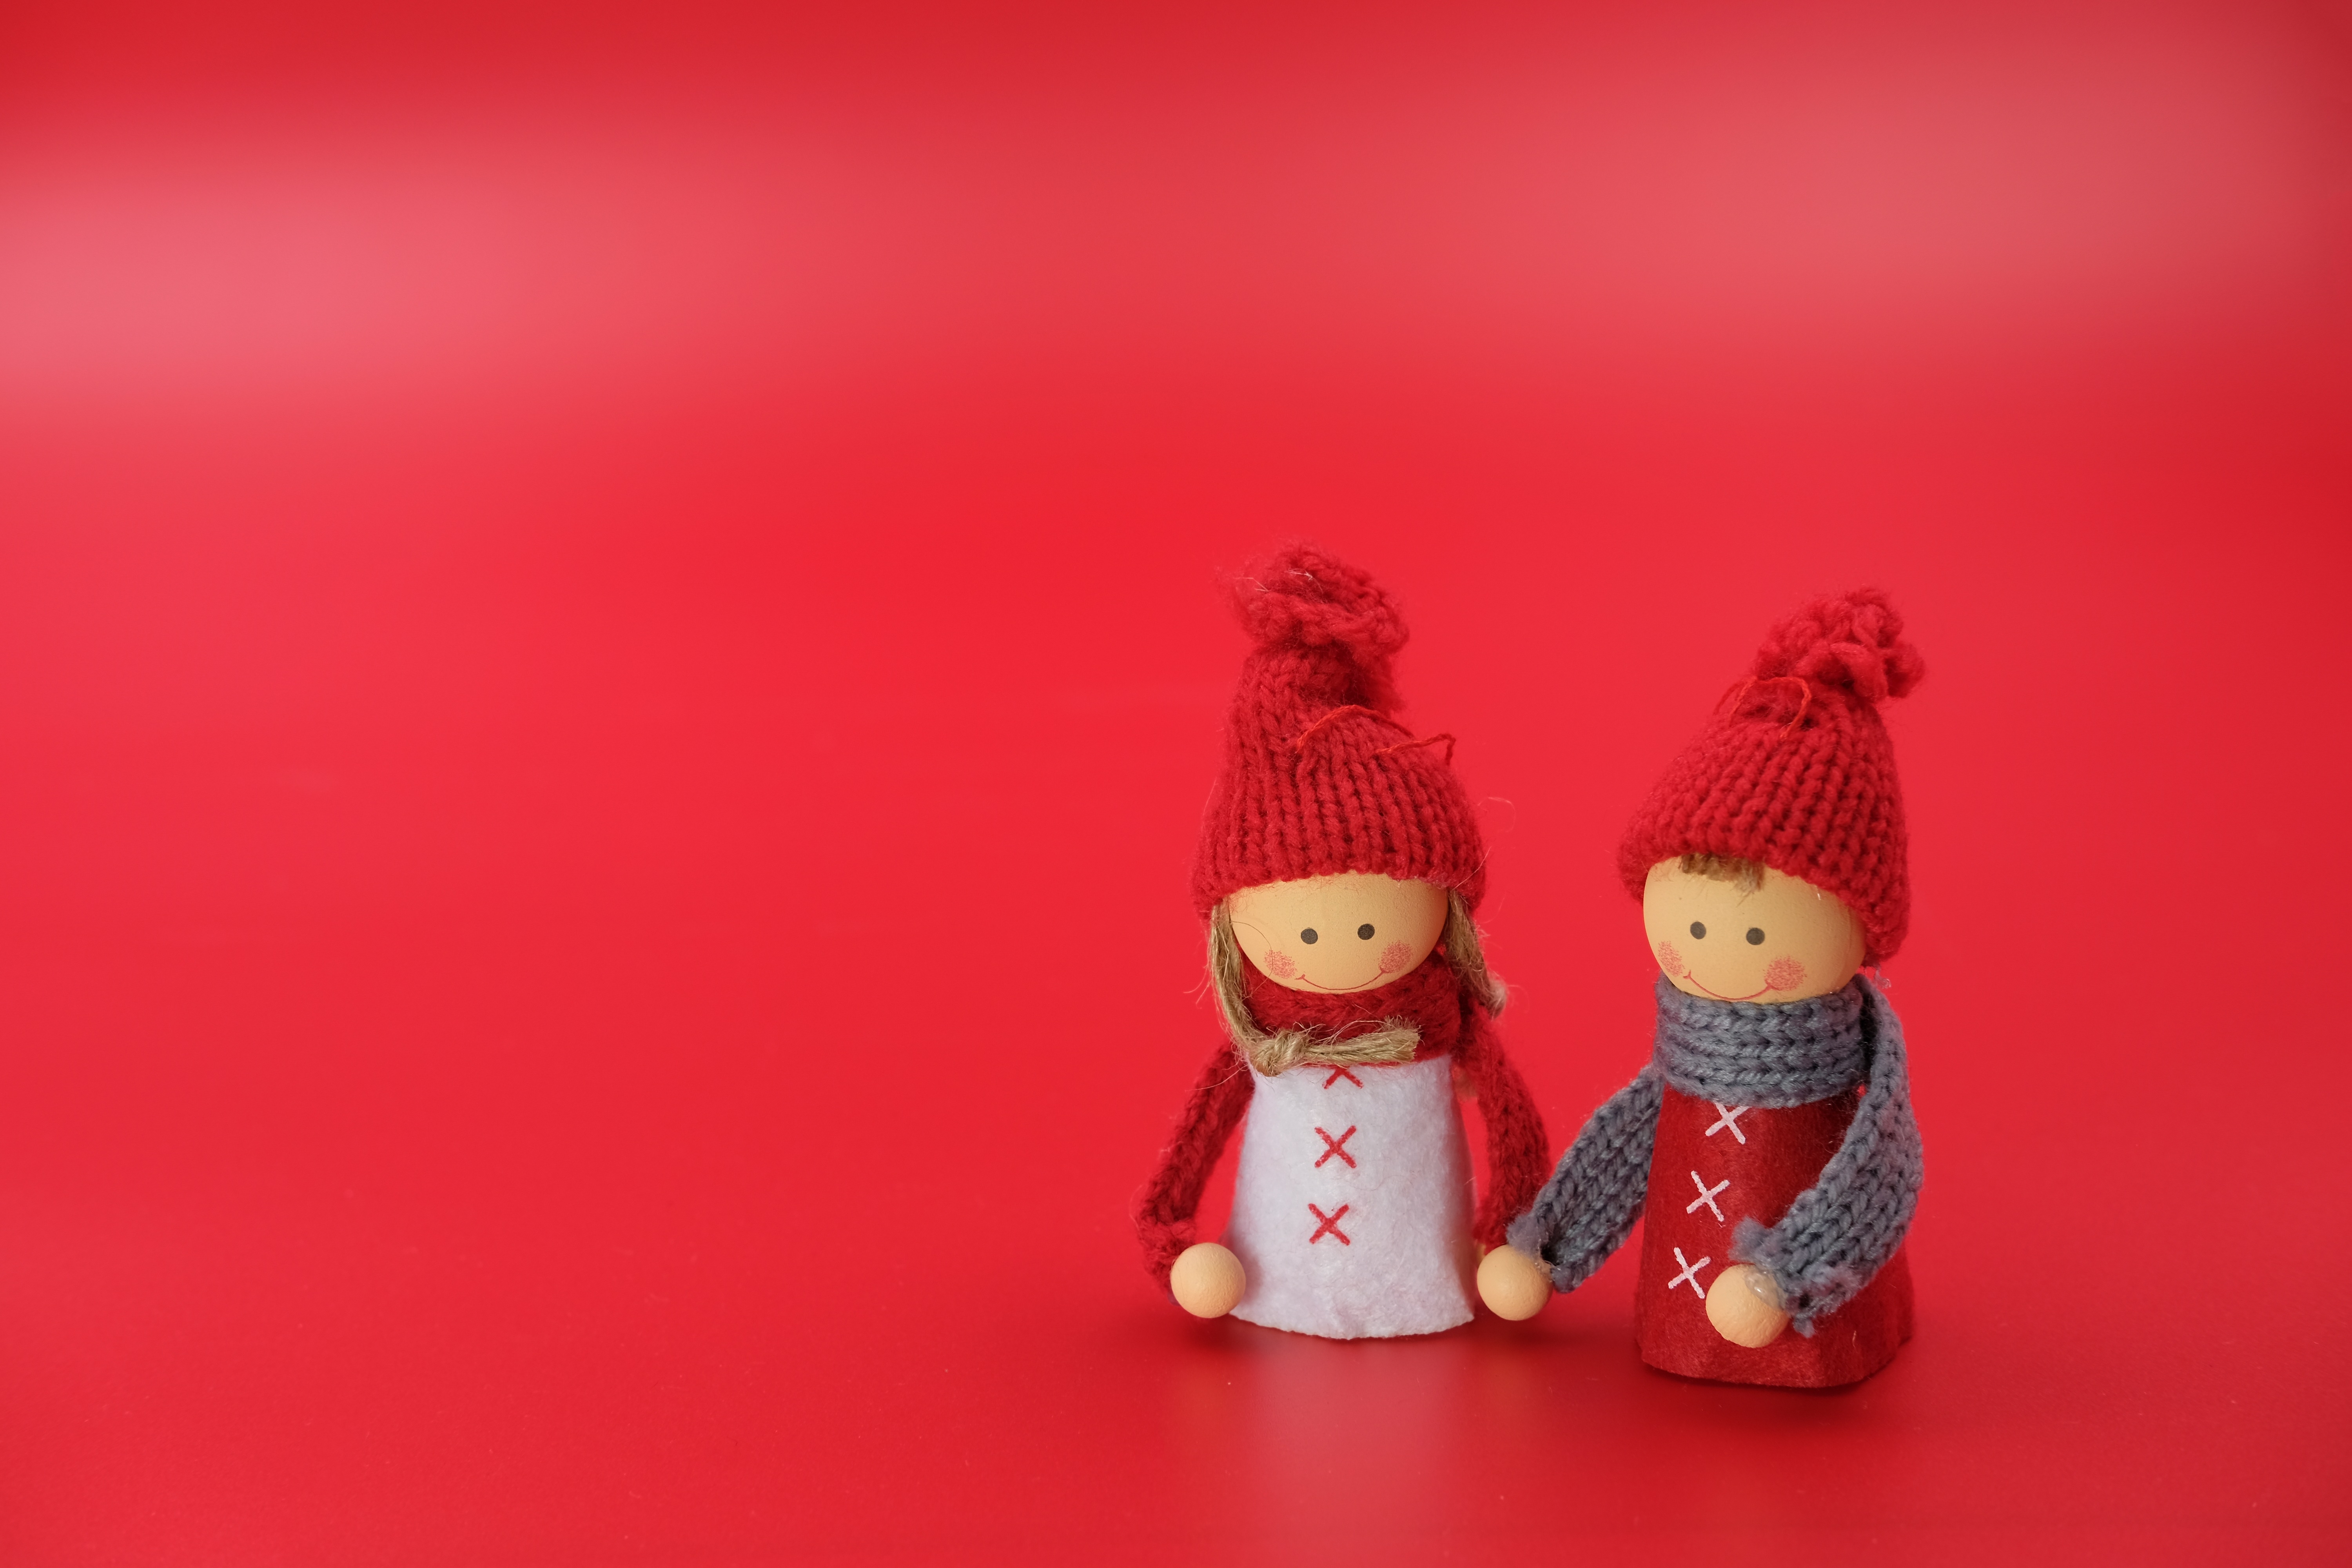 HD wallpaper, Closeup, Art And Crafts, Beautiful, Doll, Christmas Decoration, Figures, Woman, 5K, Cute Dolls, Man, Red Background